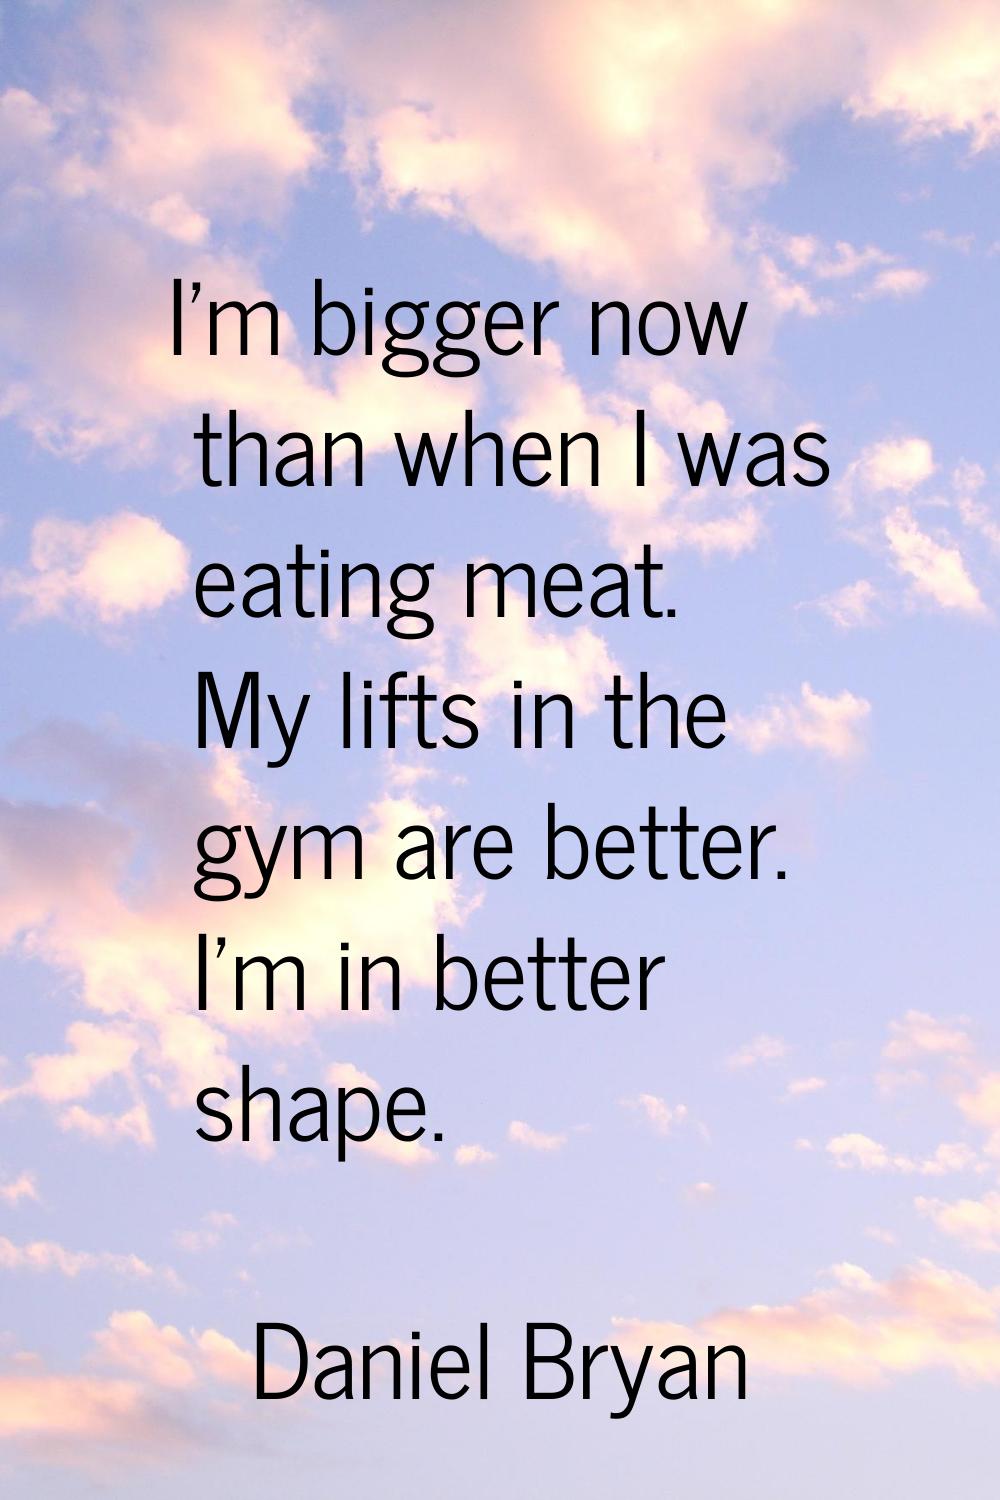 I'm bigger now than when I was eating meat. My lifts in the gym are better. I'm in better shape.